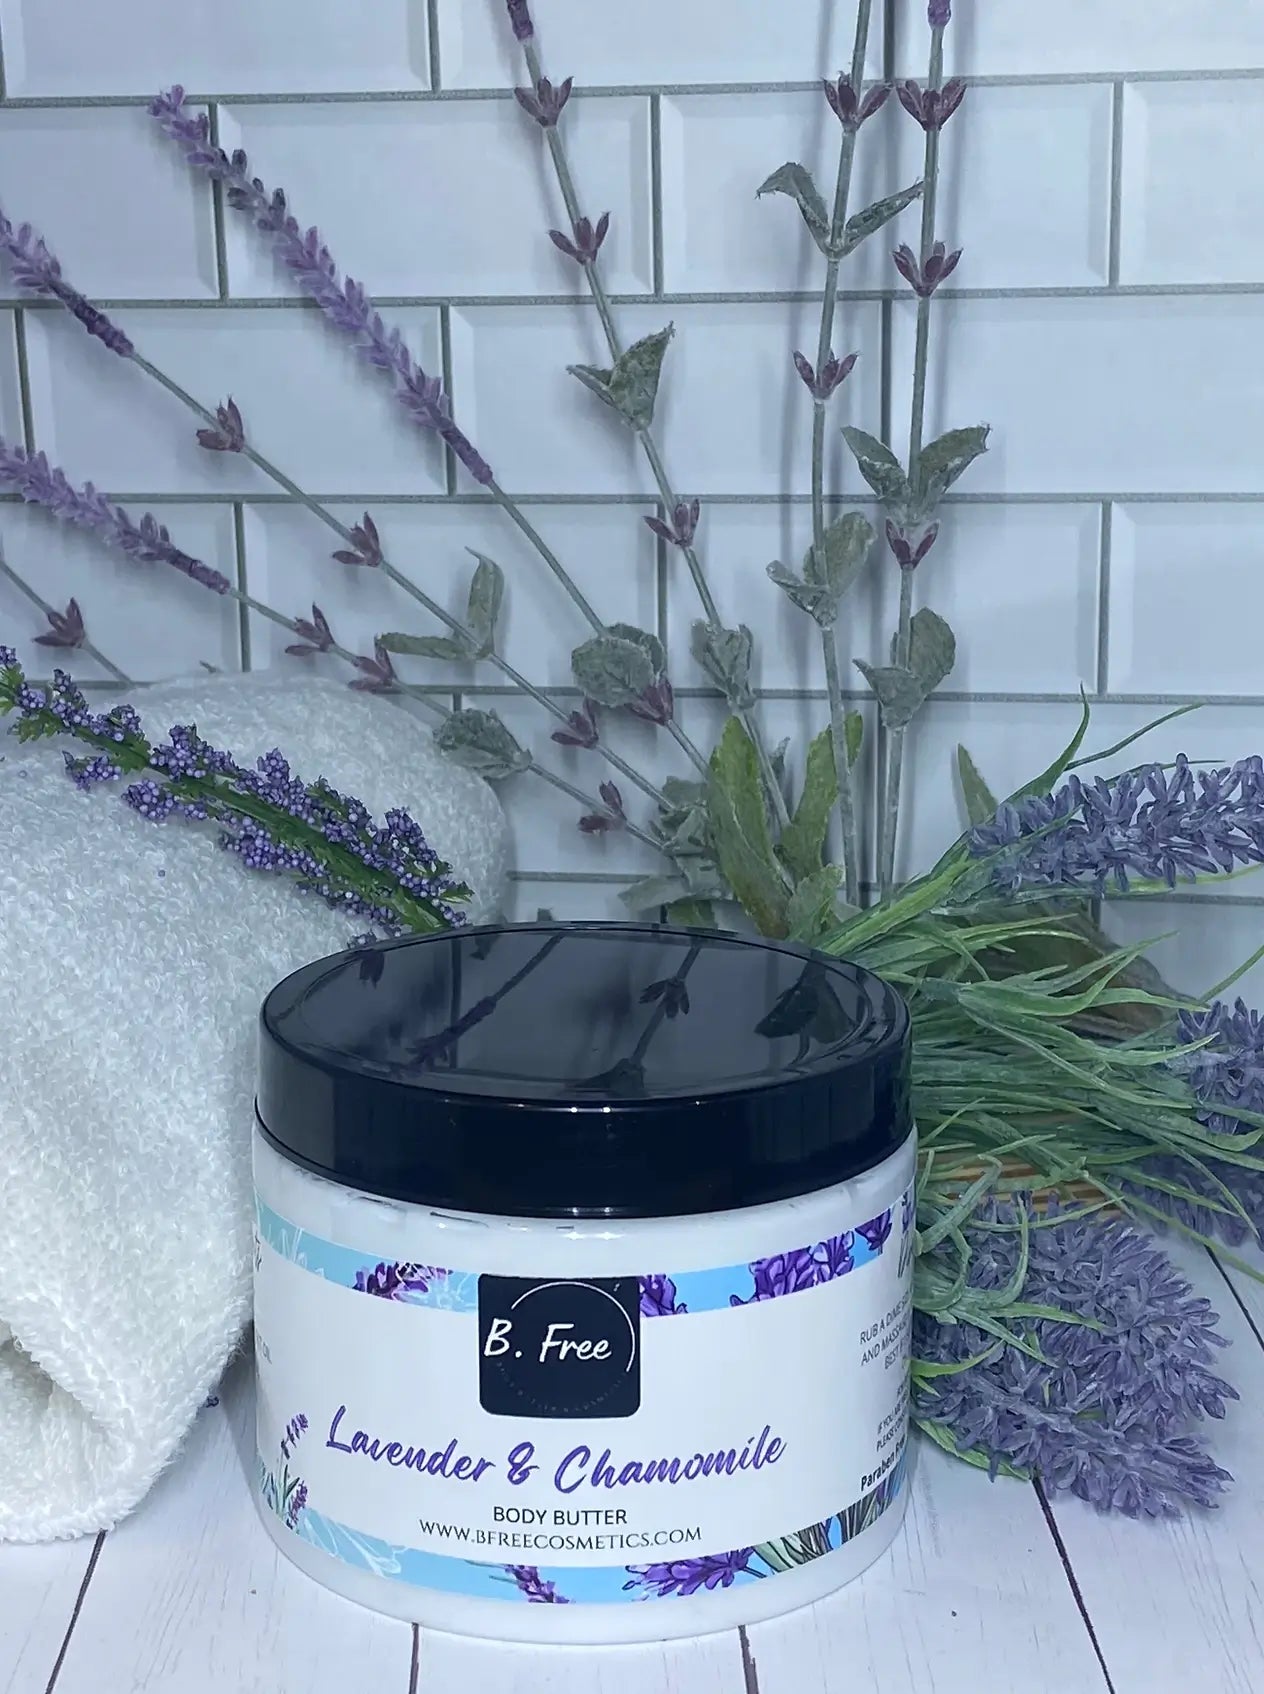 Lavender & Chamomile Whipped Body Butter